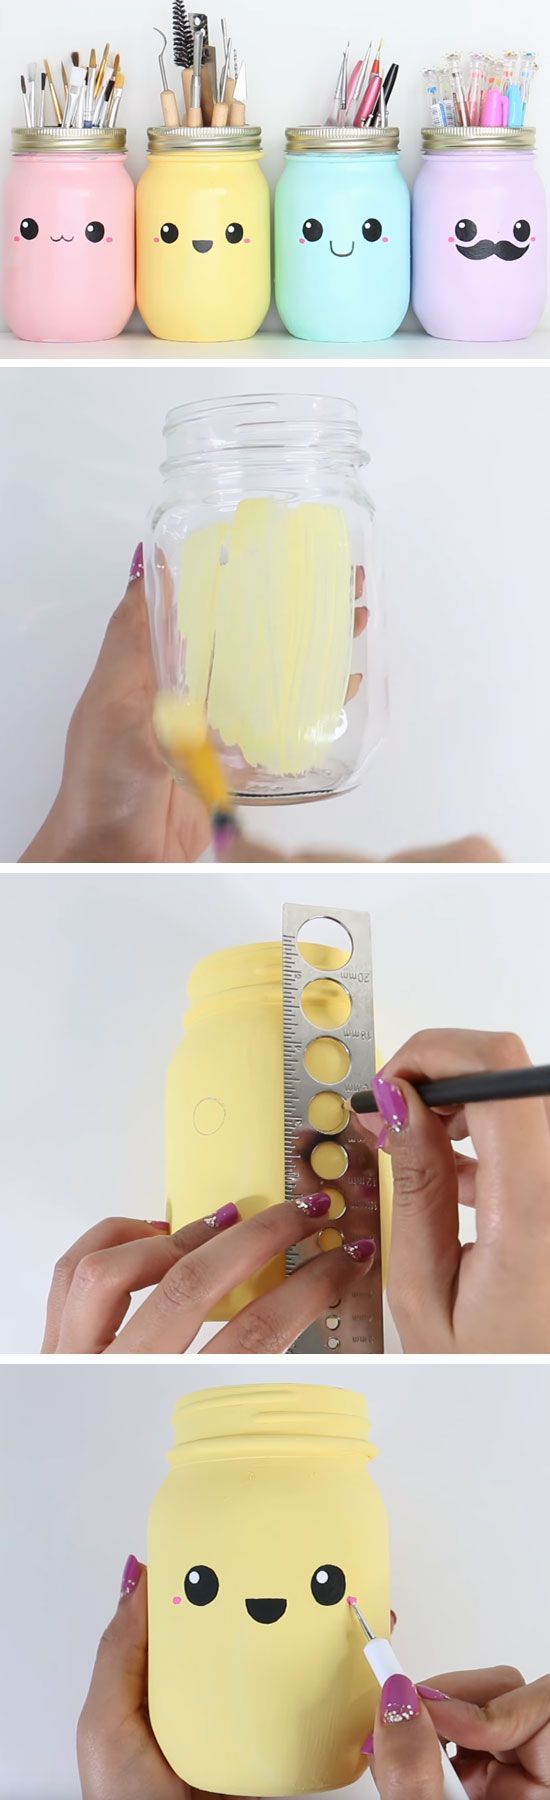 Pastel Mason Jar Storage | DIY Spring Room Decor Ideas for Teens | Awesome Decor Ideas for the Home on a Budget